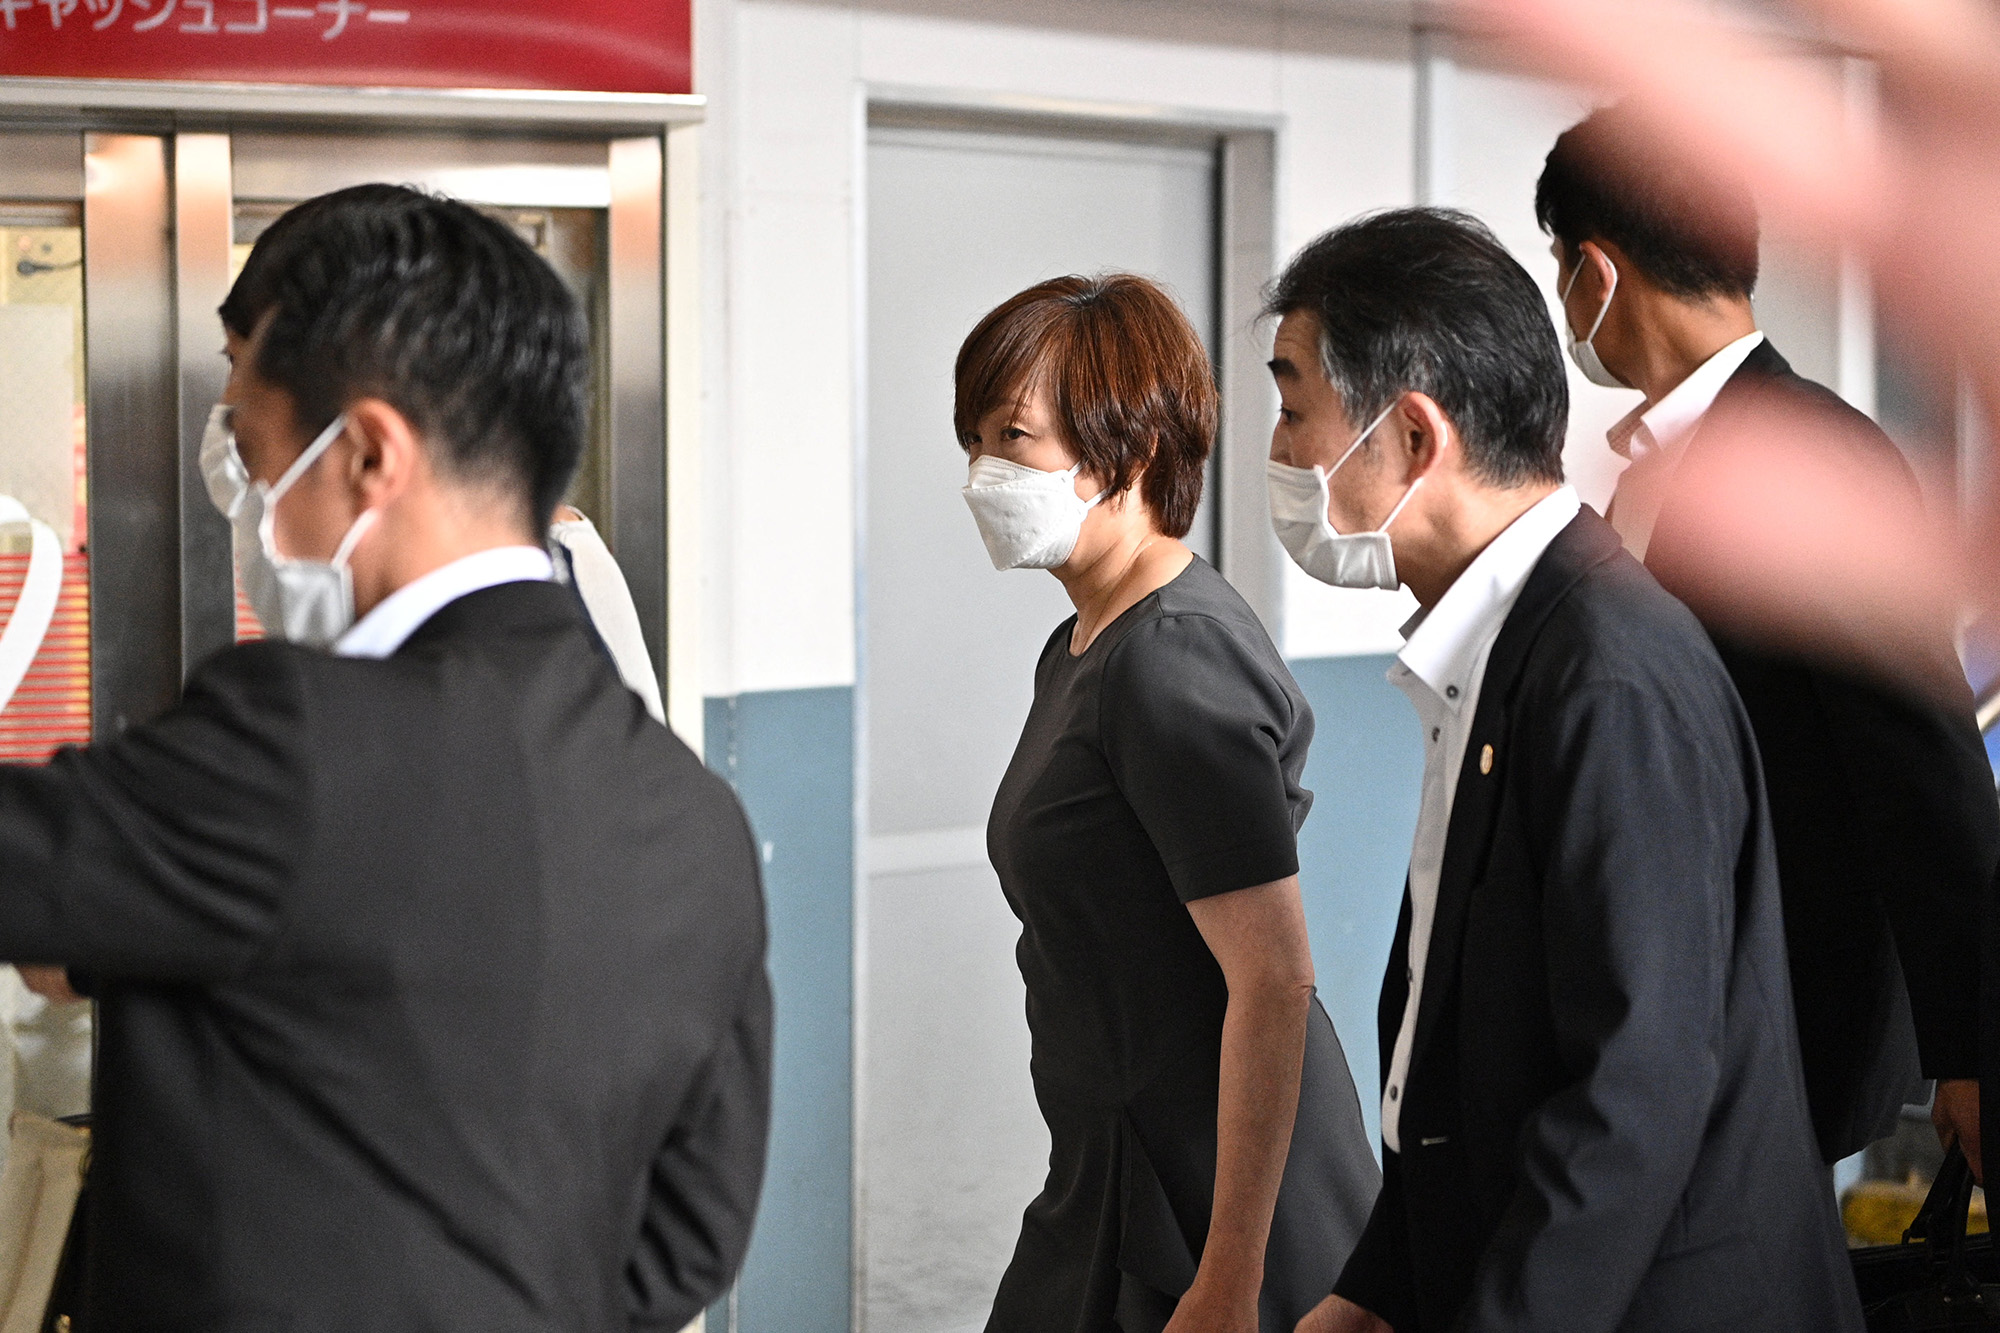 Akie Abe, wife of former Japanese Prime Minster Shinzo Abe, arrives by train in Nara before heading to the Nara Medical University Hospital in Kashihara, Nara Prefecture on July 8. 